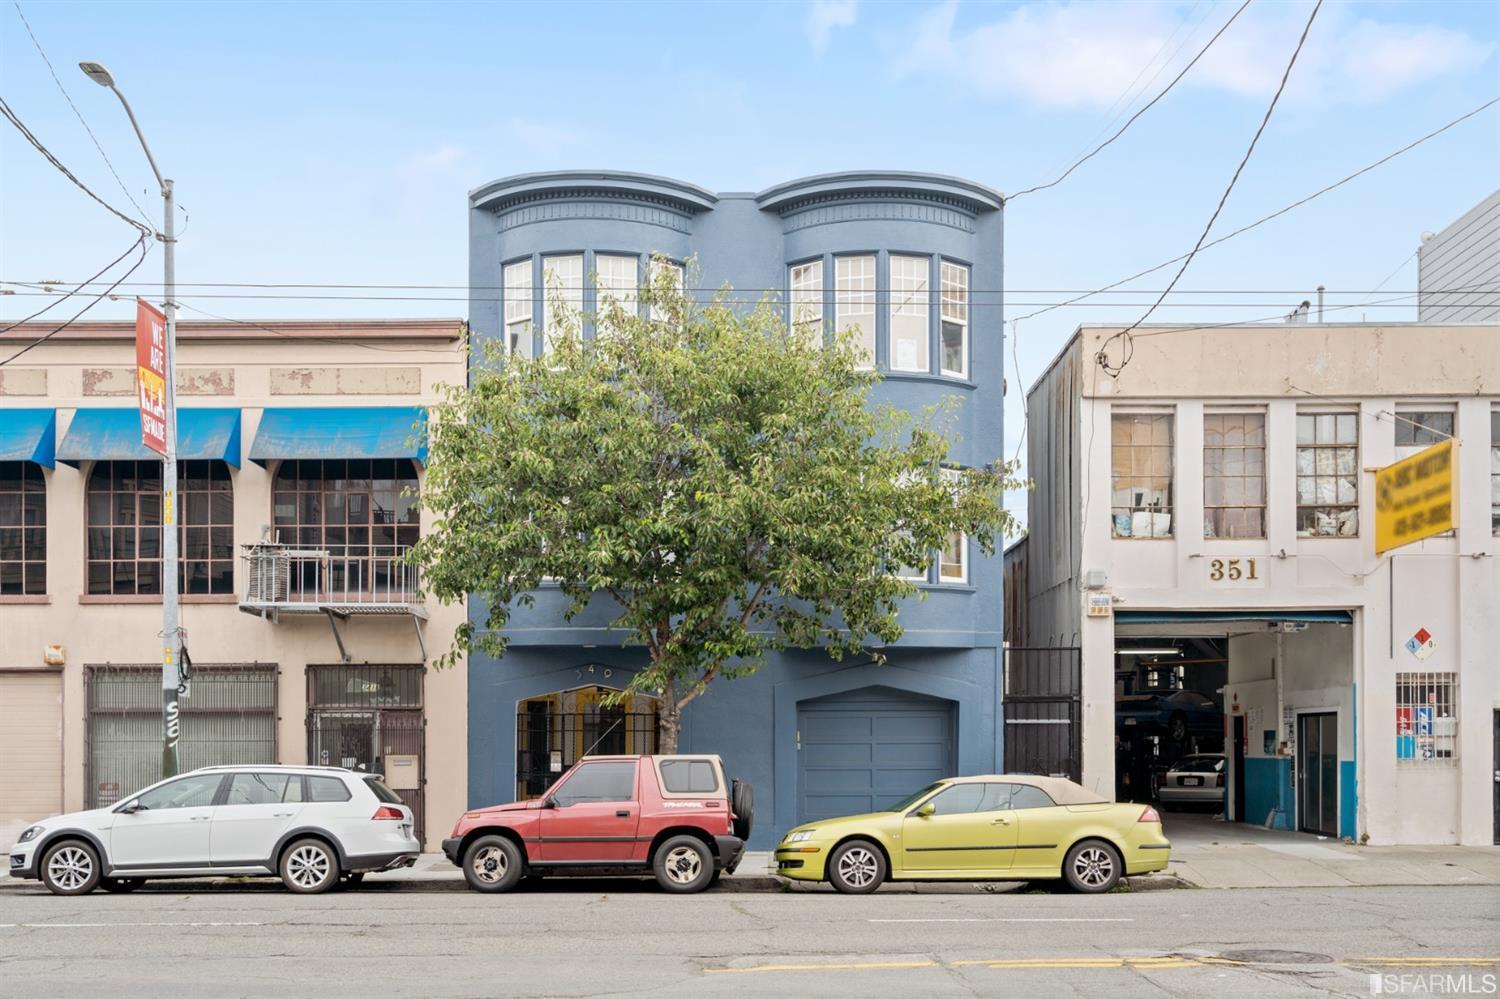 Feature photo for 349 S. Van Ness Ave #1, San Francisco